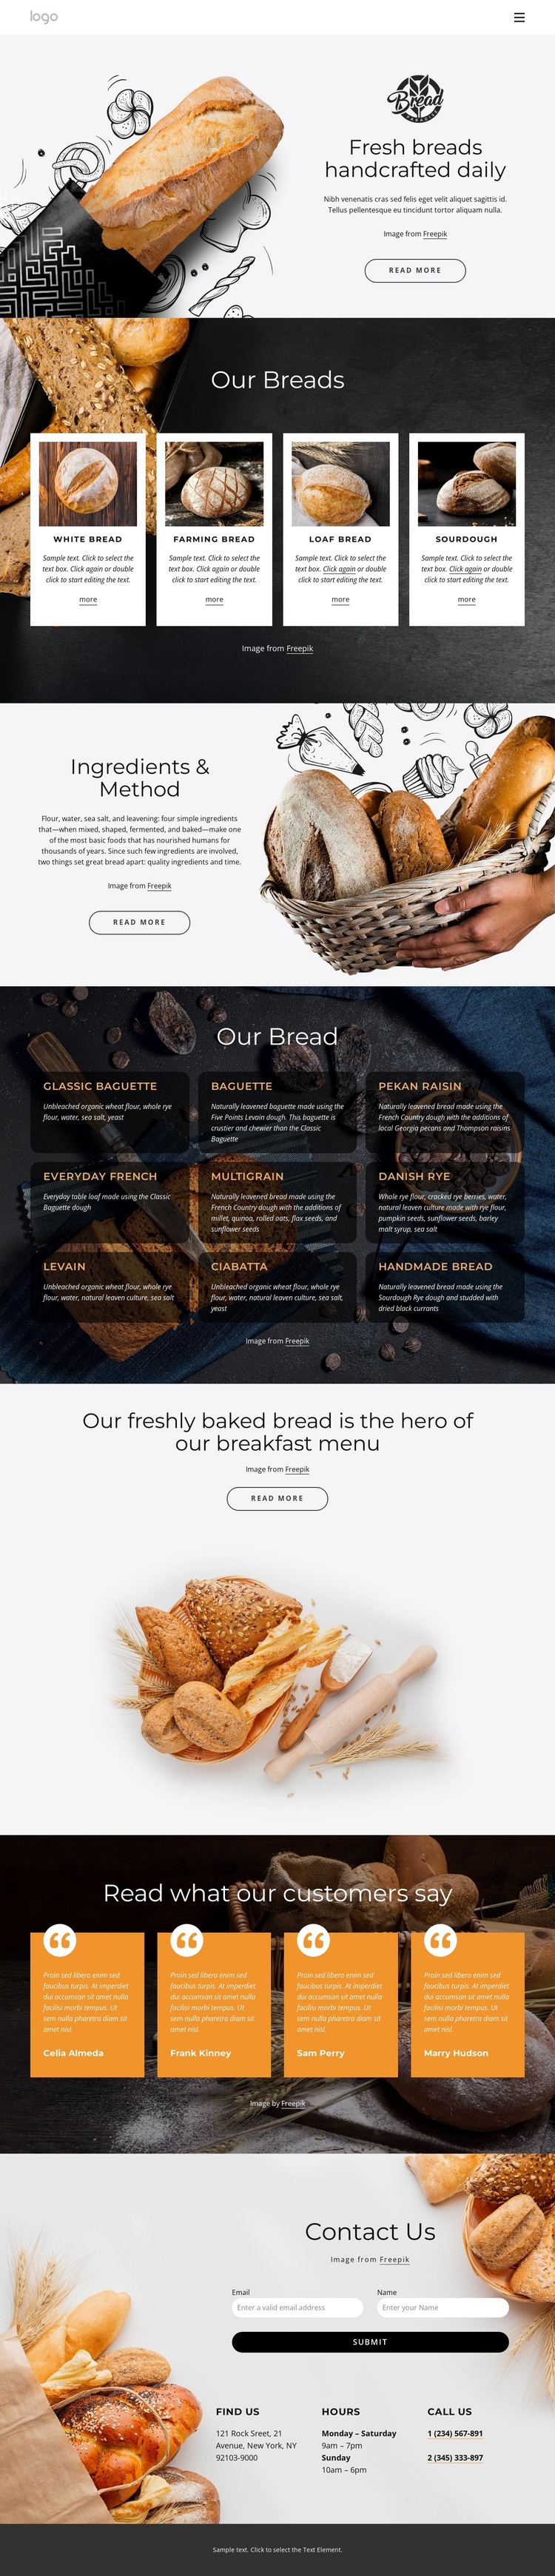 Fresh bread handcrafted every day Joomla Page Builder